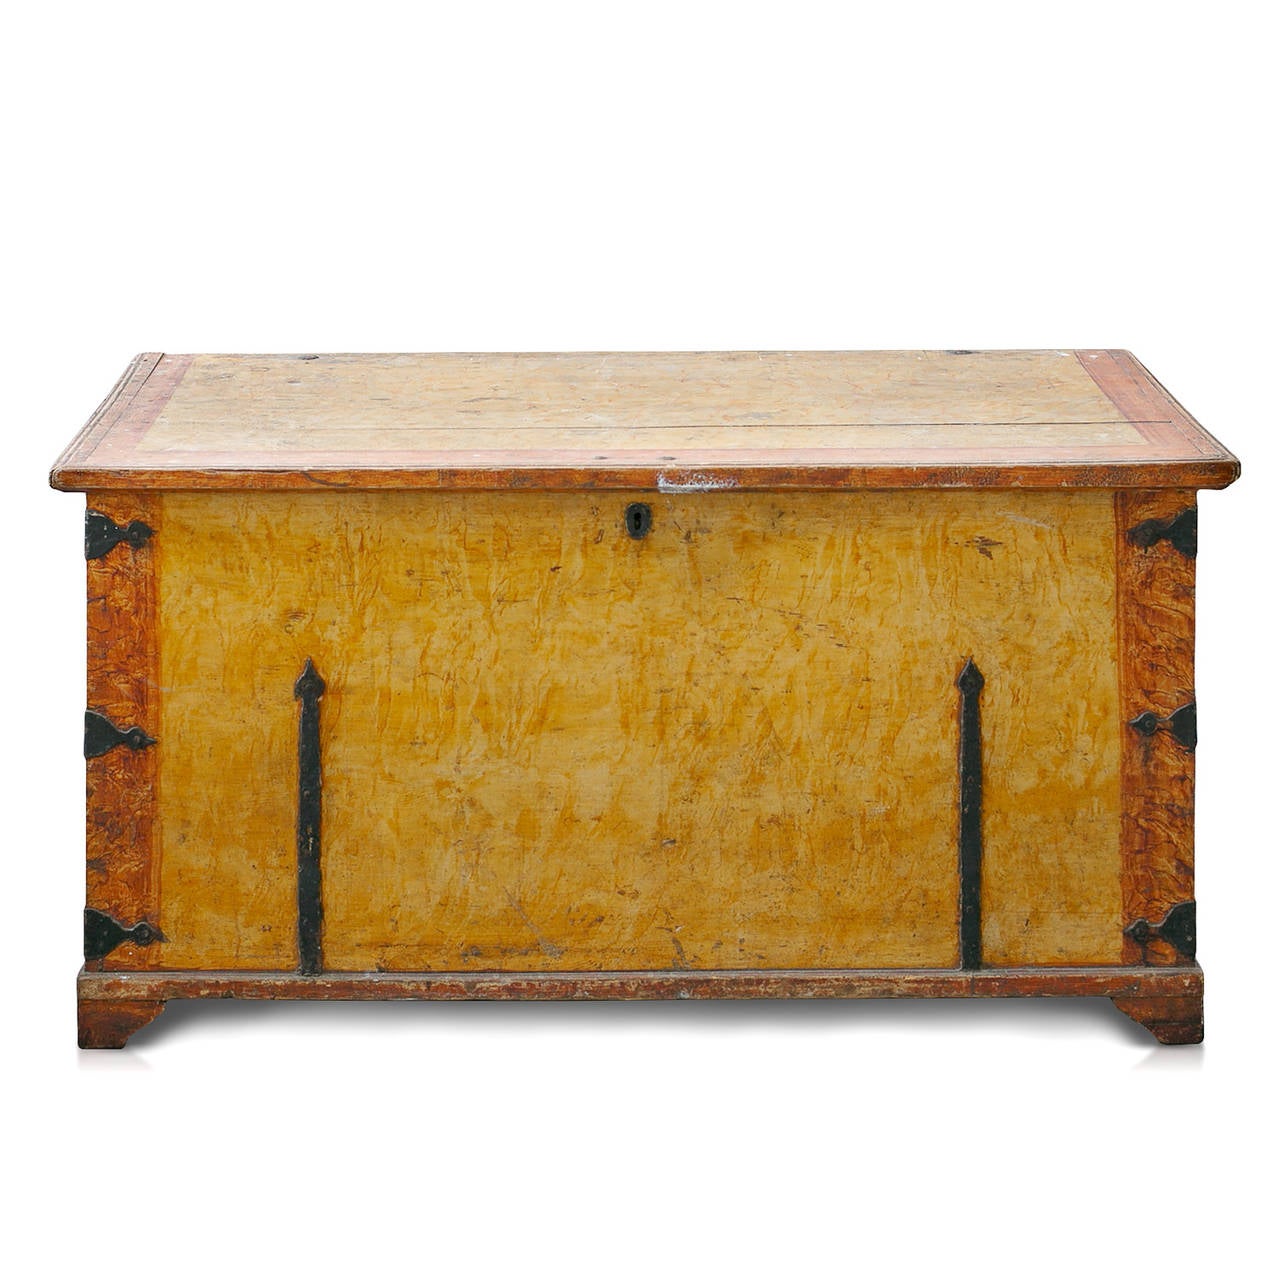 Early 19th century Swedish provincial chest in original color and hardware with small compartment inside.